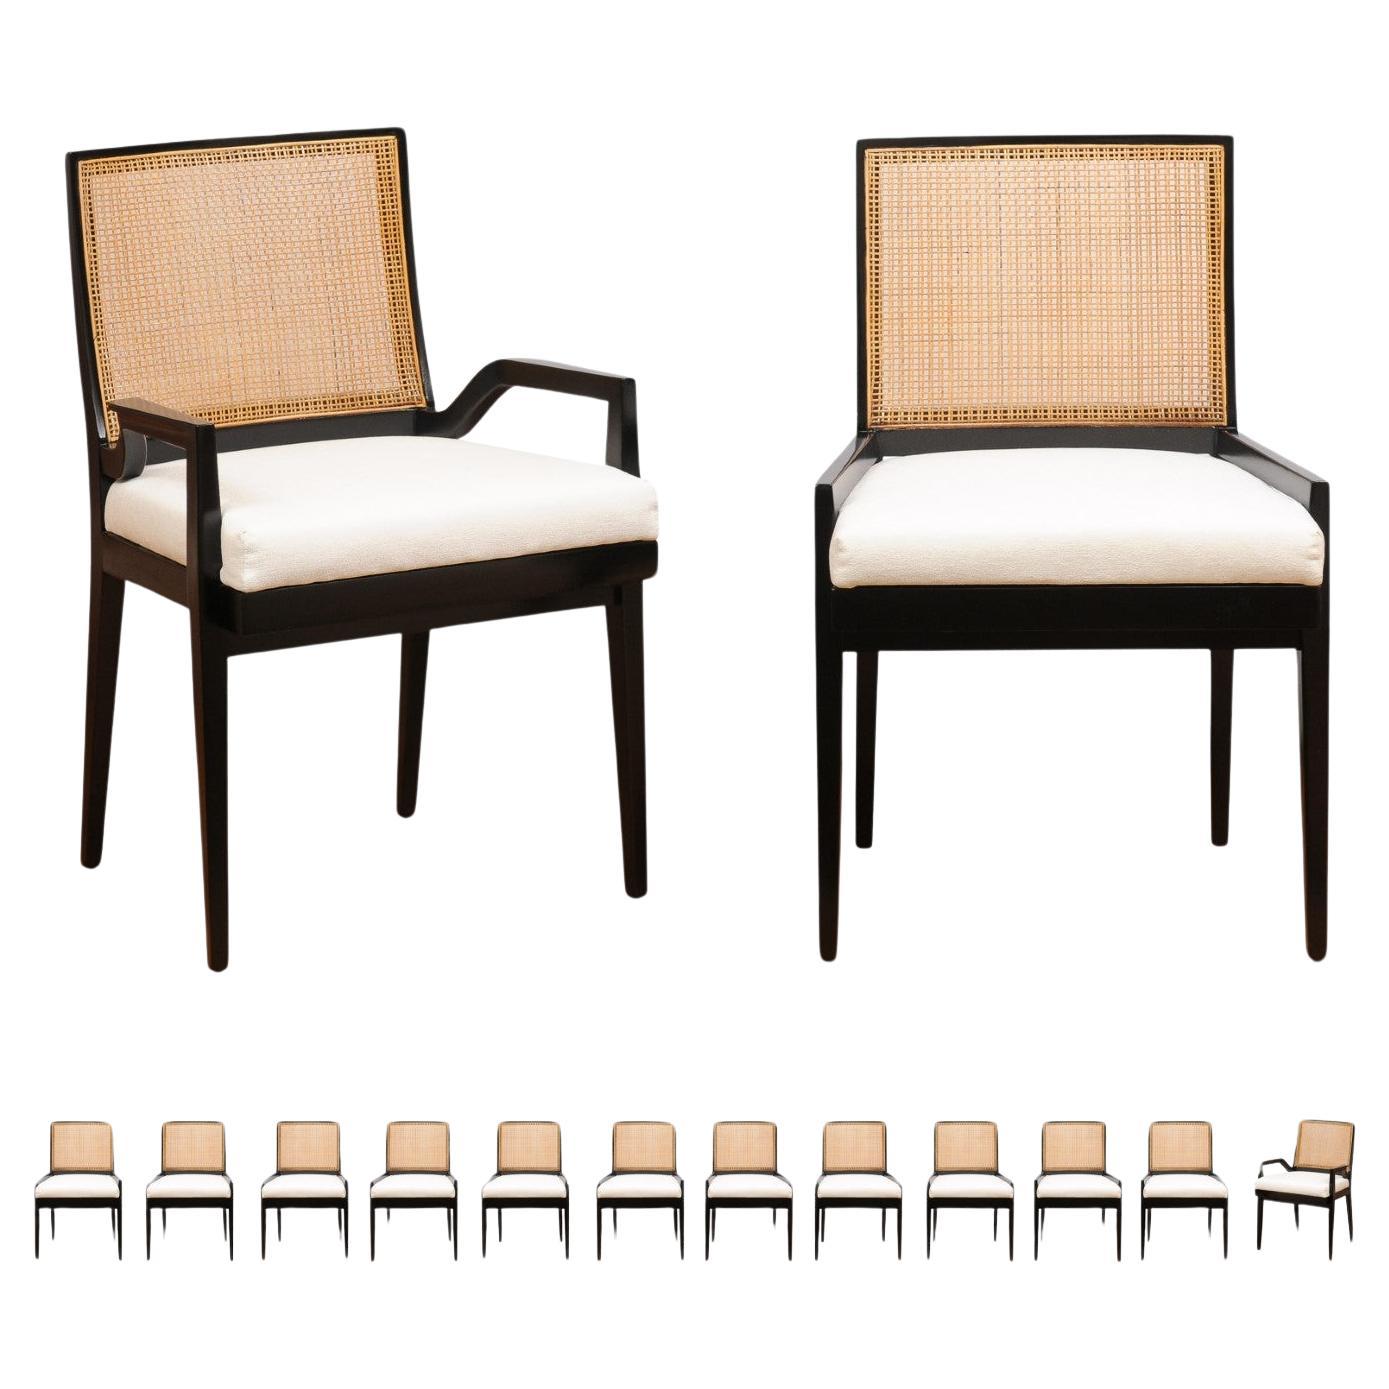 Stellar Set of 14 Black Lacquer Cane Chairs by Michael Taylor, circa 1960 For Sale